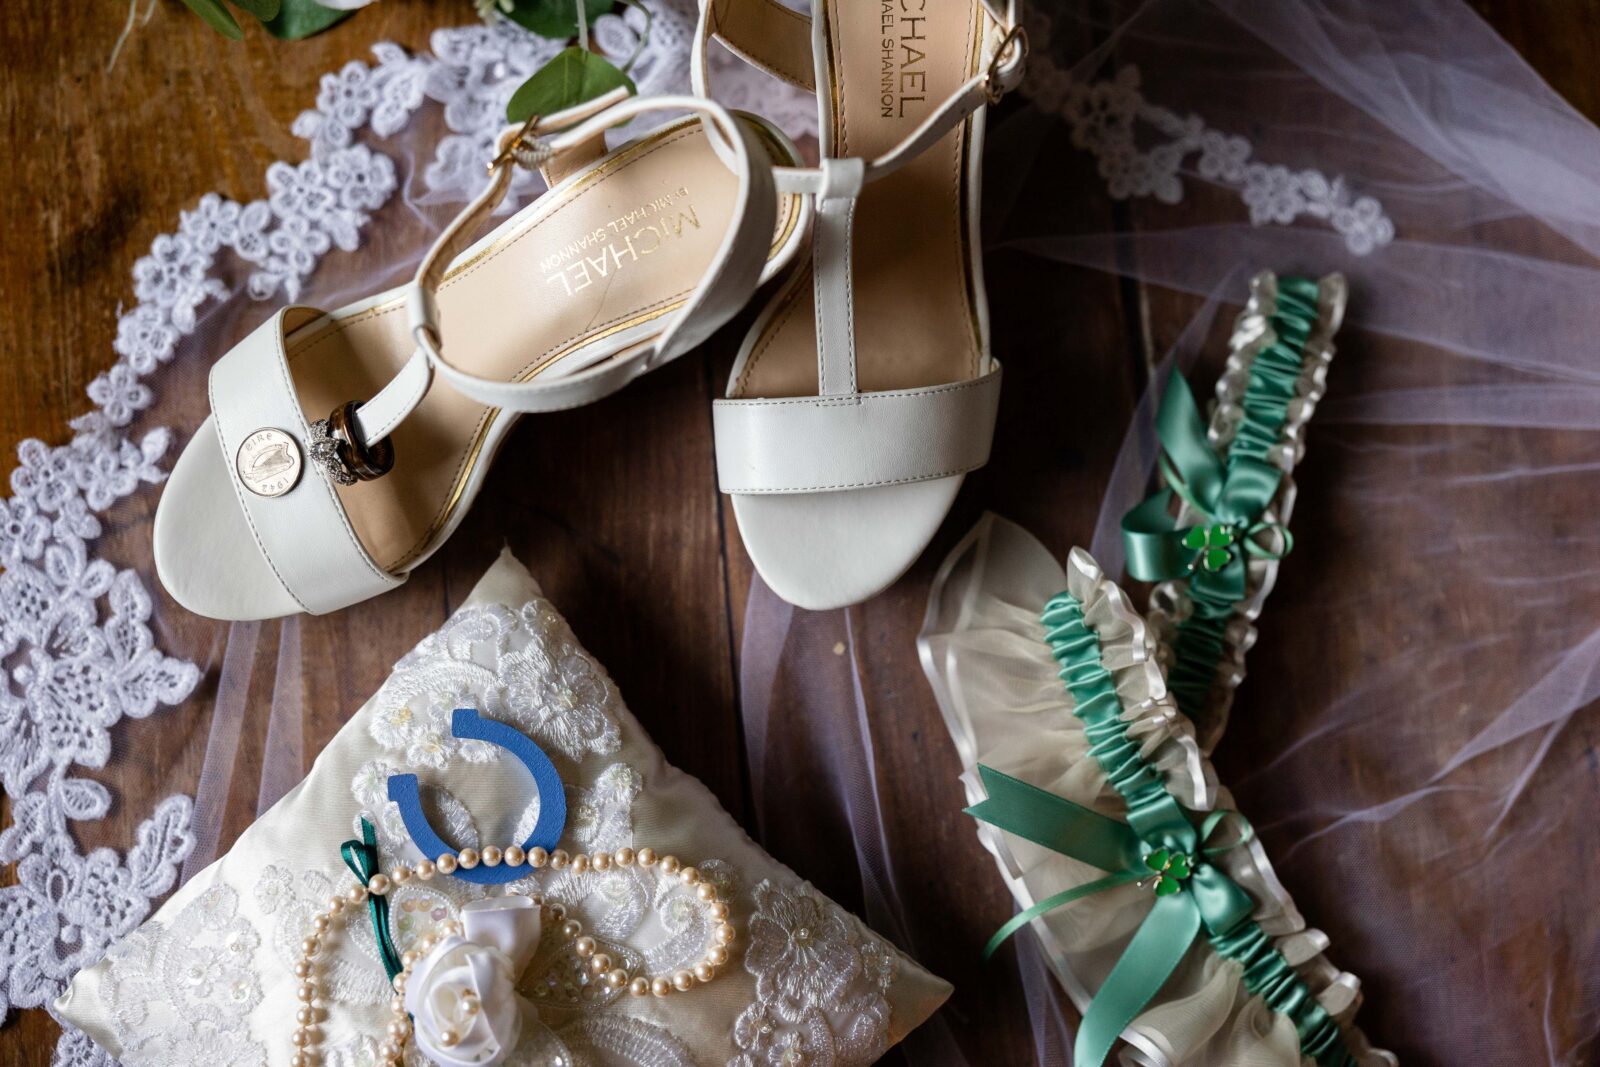 details shot of a saint patty's day themed wedding with a six pence attached to brides white strapped sandles with green lace garters and detailed lace veil and ring bearer pillow